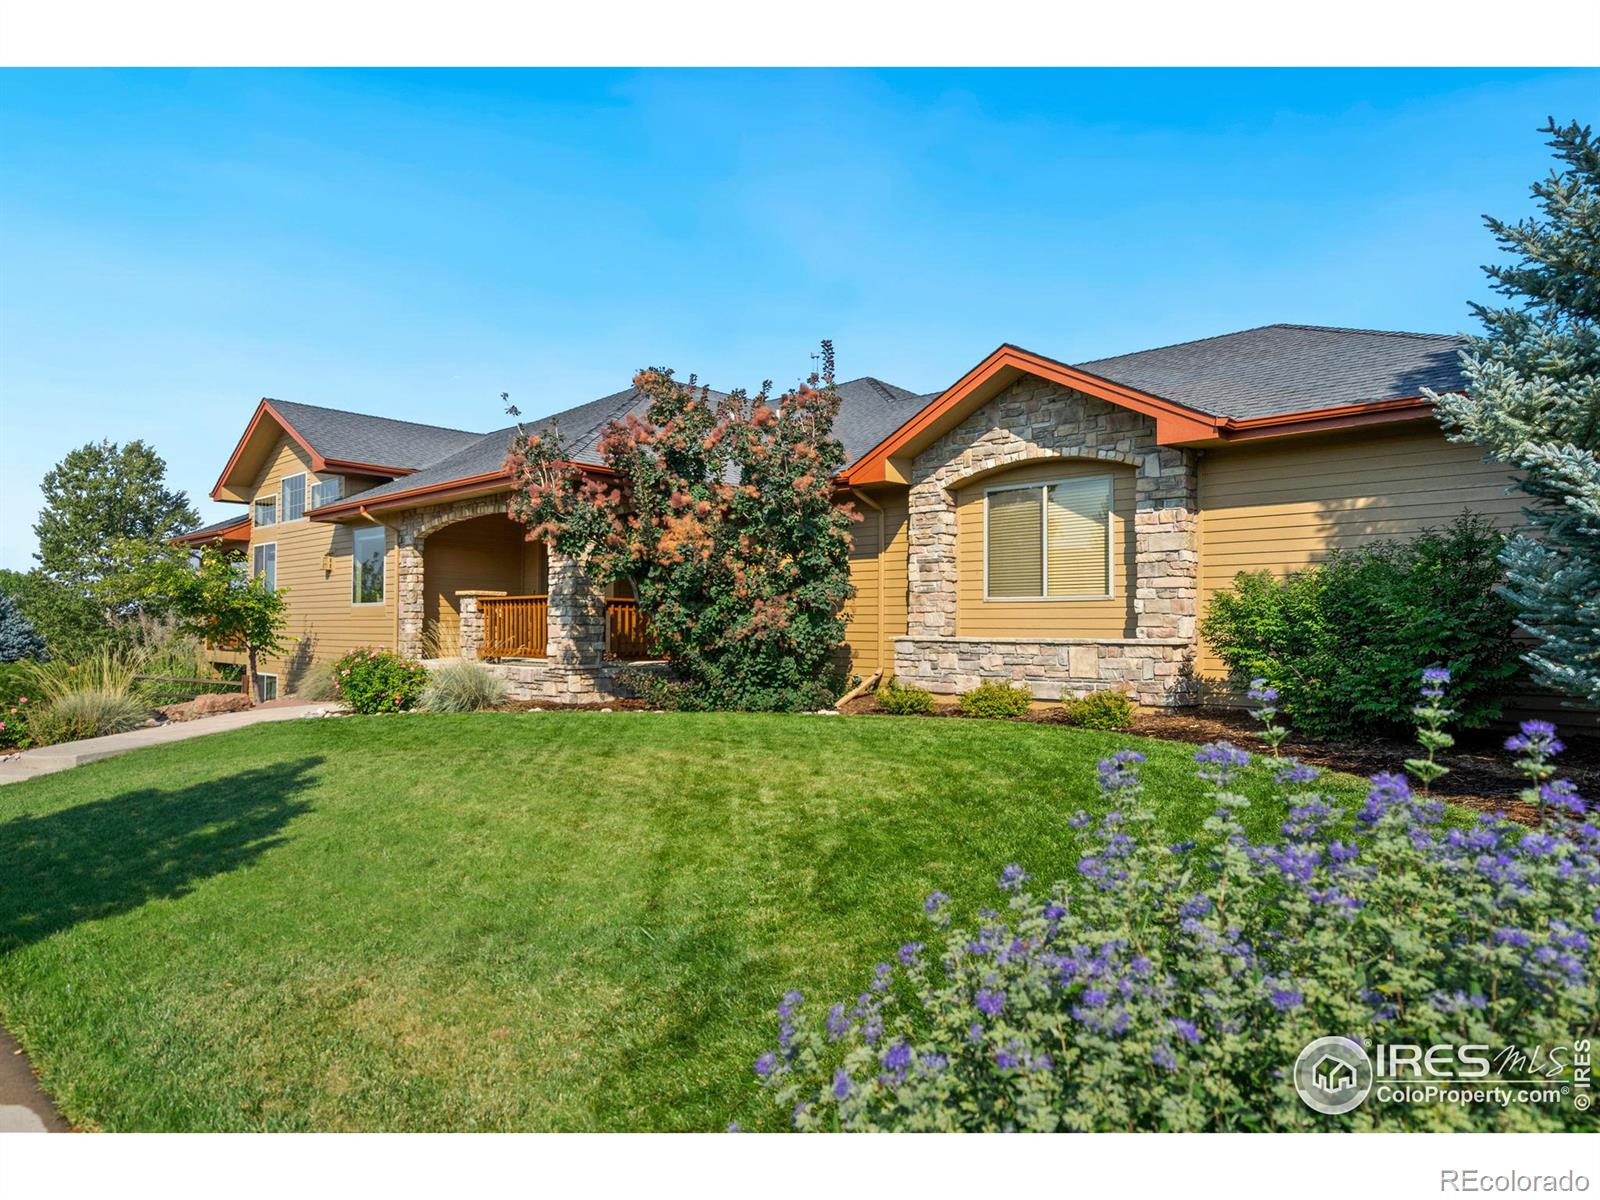 Report Image for 1114  Turnstone Lane,Fort Collins, Colorado